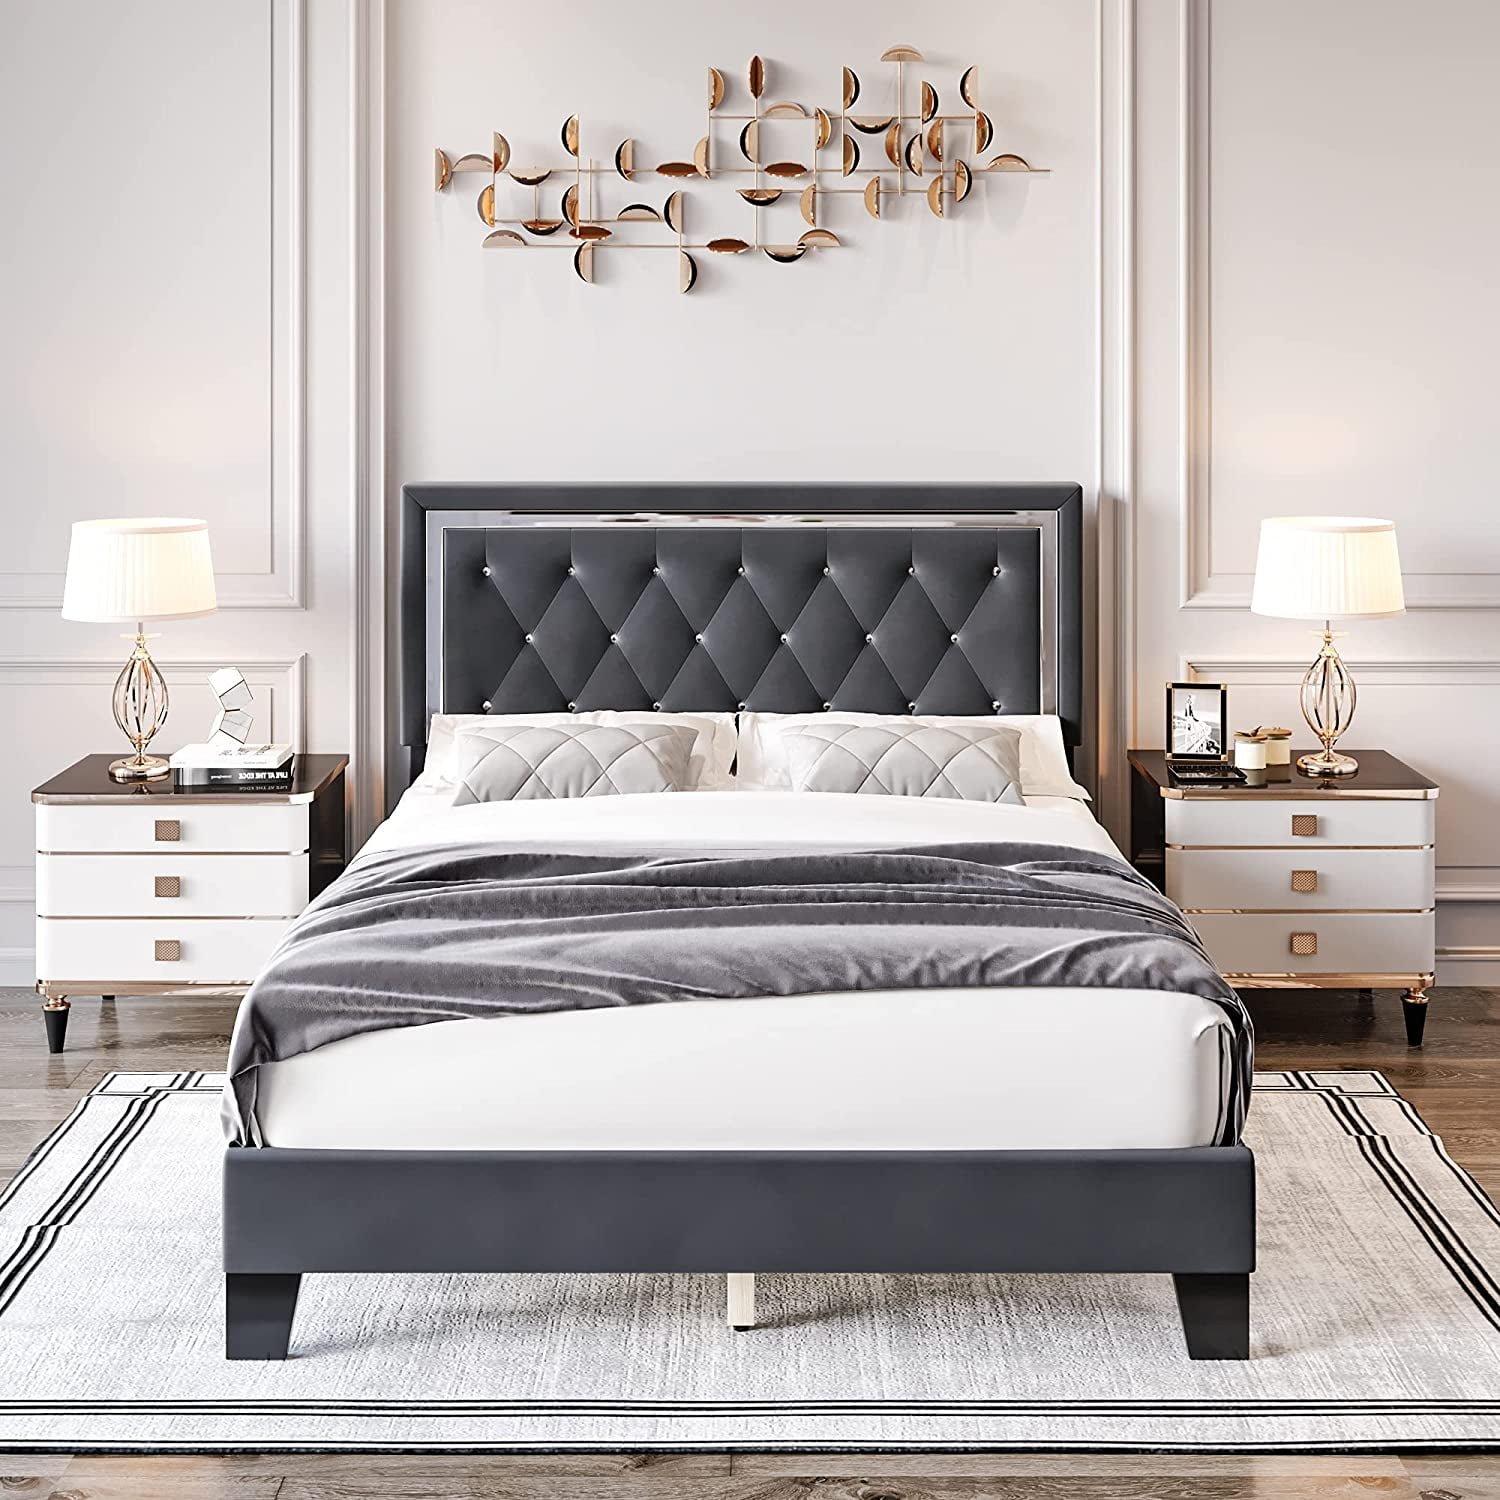 Faux Leather Upholstered Mattress Foundation SHA CERLIN Full Size Platform Bed Frame with Button Tufted Headboard No Box Spring Needed Wooden Slat Support White